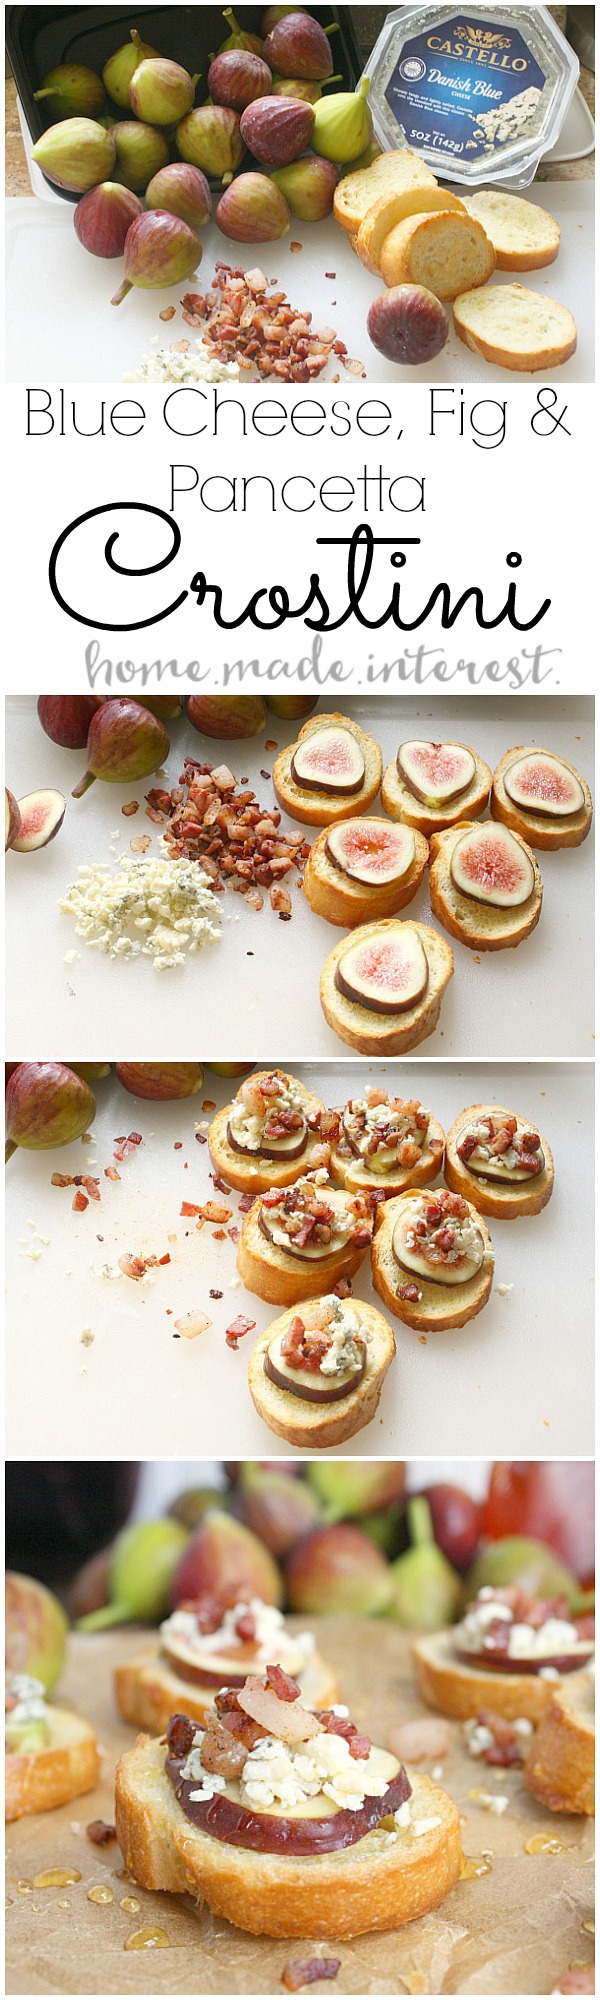 This easy appetizer recipe is fancy enough to serve at a dinner party but simple enough to make as a bite size appetizer on girls night. The sharp taste of blue cheese with fresh fig and the salty pancetta is amazing!